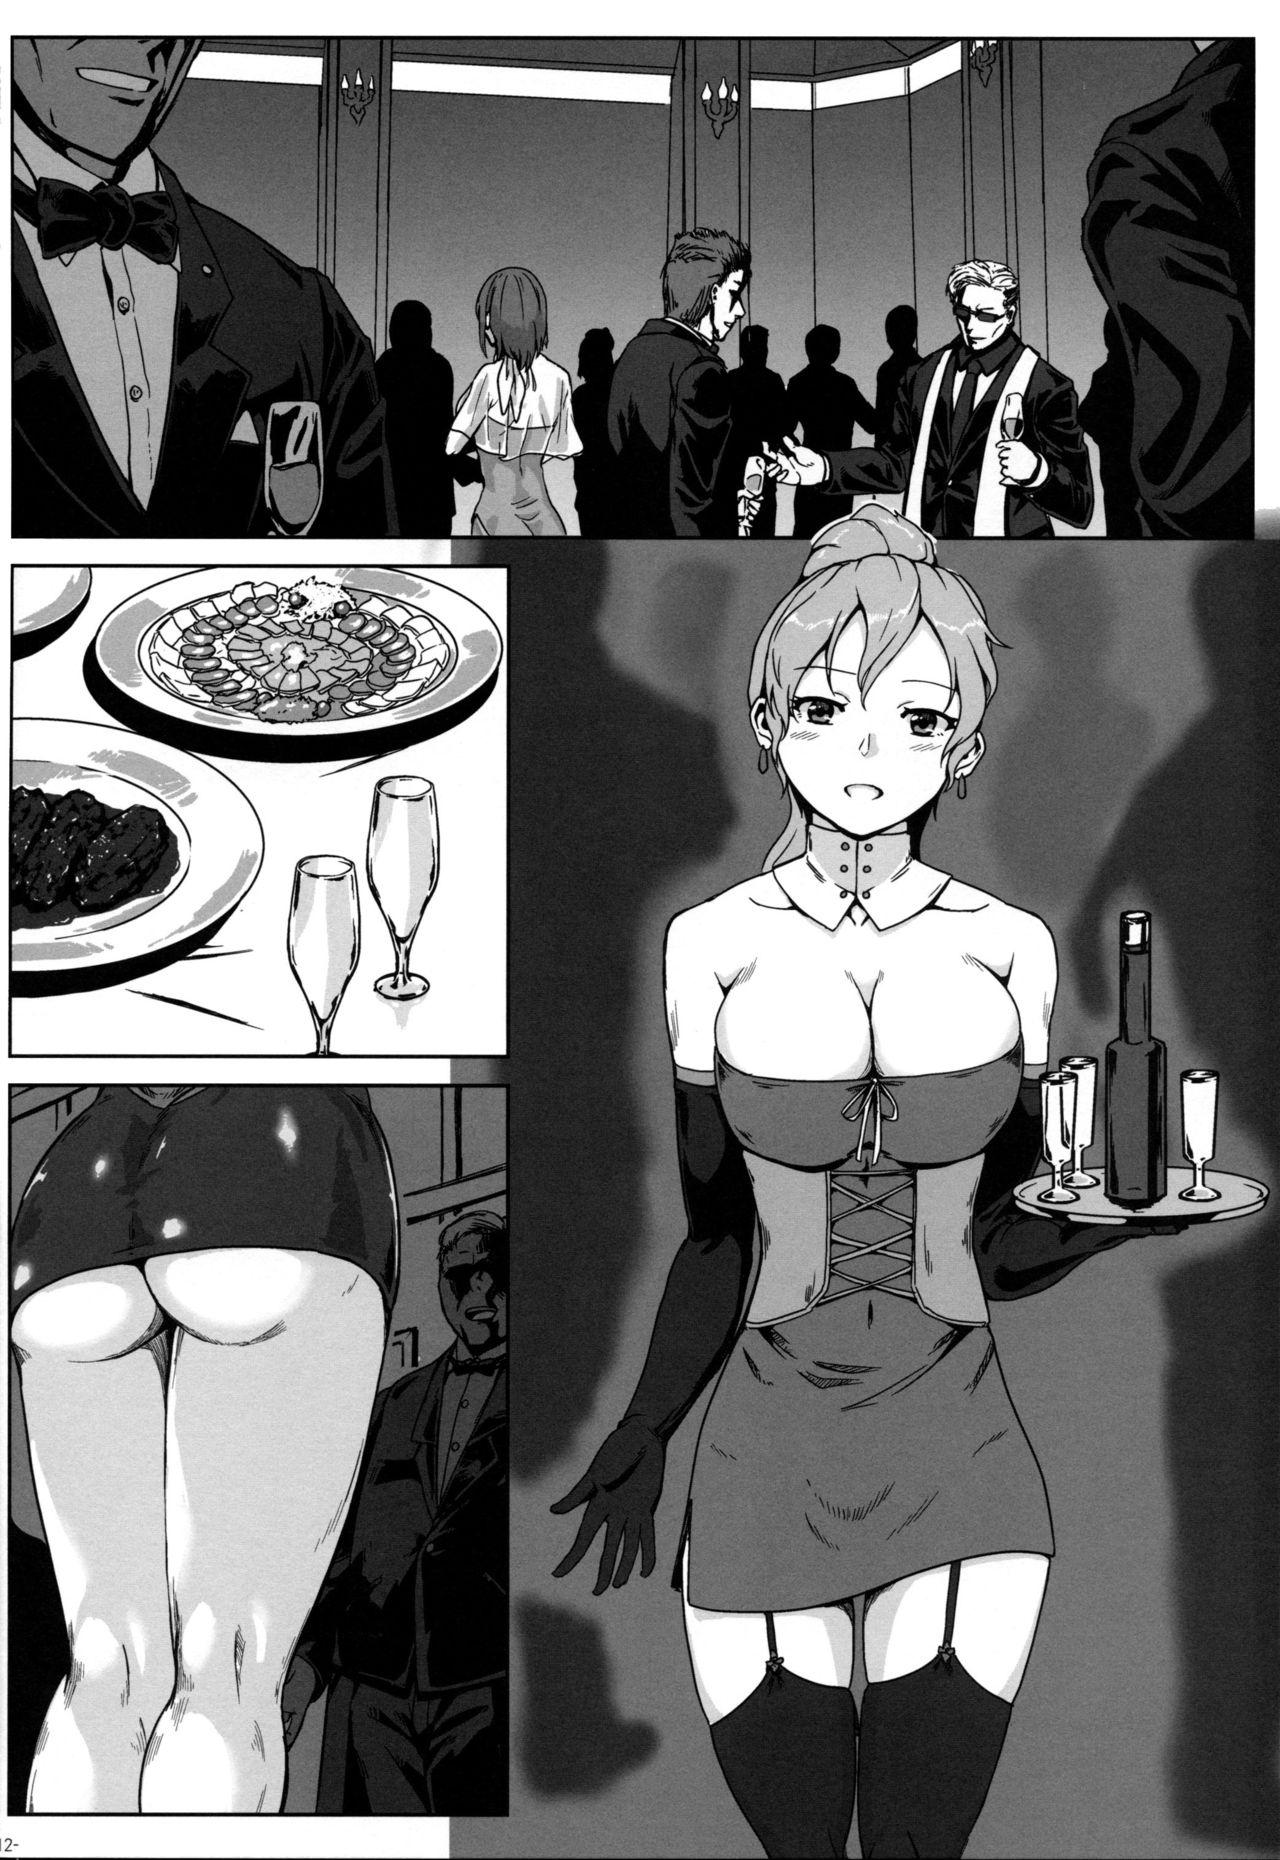 Lesbian (C97) [Lithium (Uchiga)] Again #7 "The Banquet of Madness (Mae)" (God Eater) - God eater Animation - Page 11